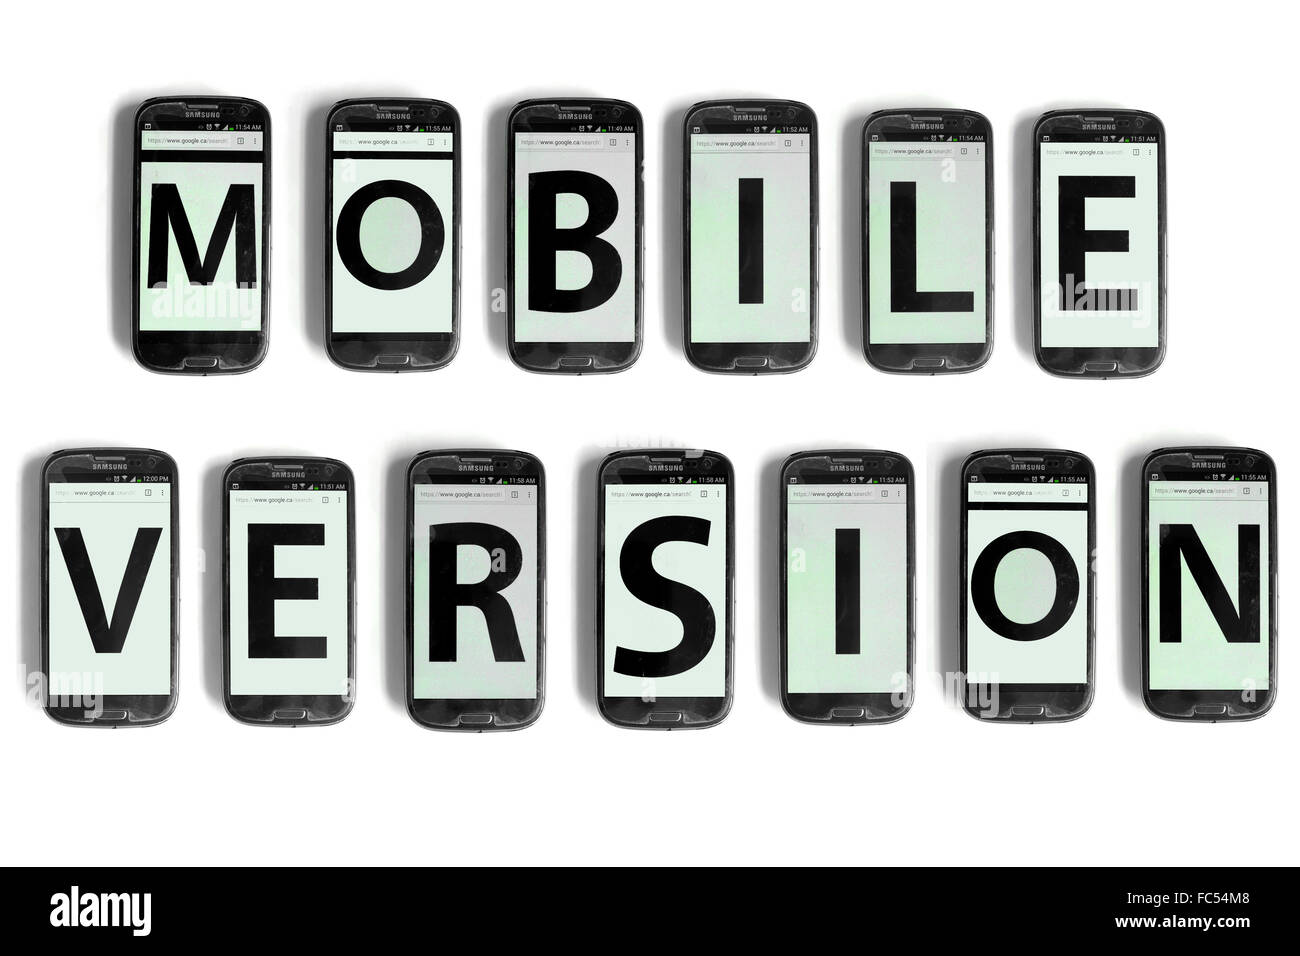 Mobile Version written on the screens of smartphones photographed against a white background. Stock Photo